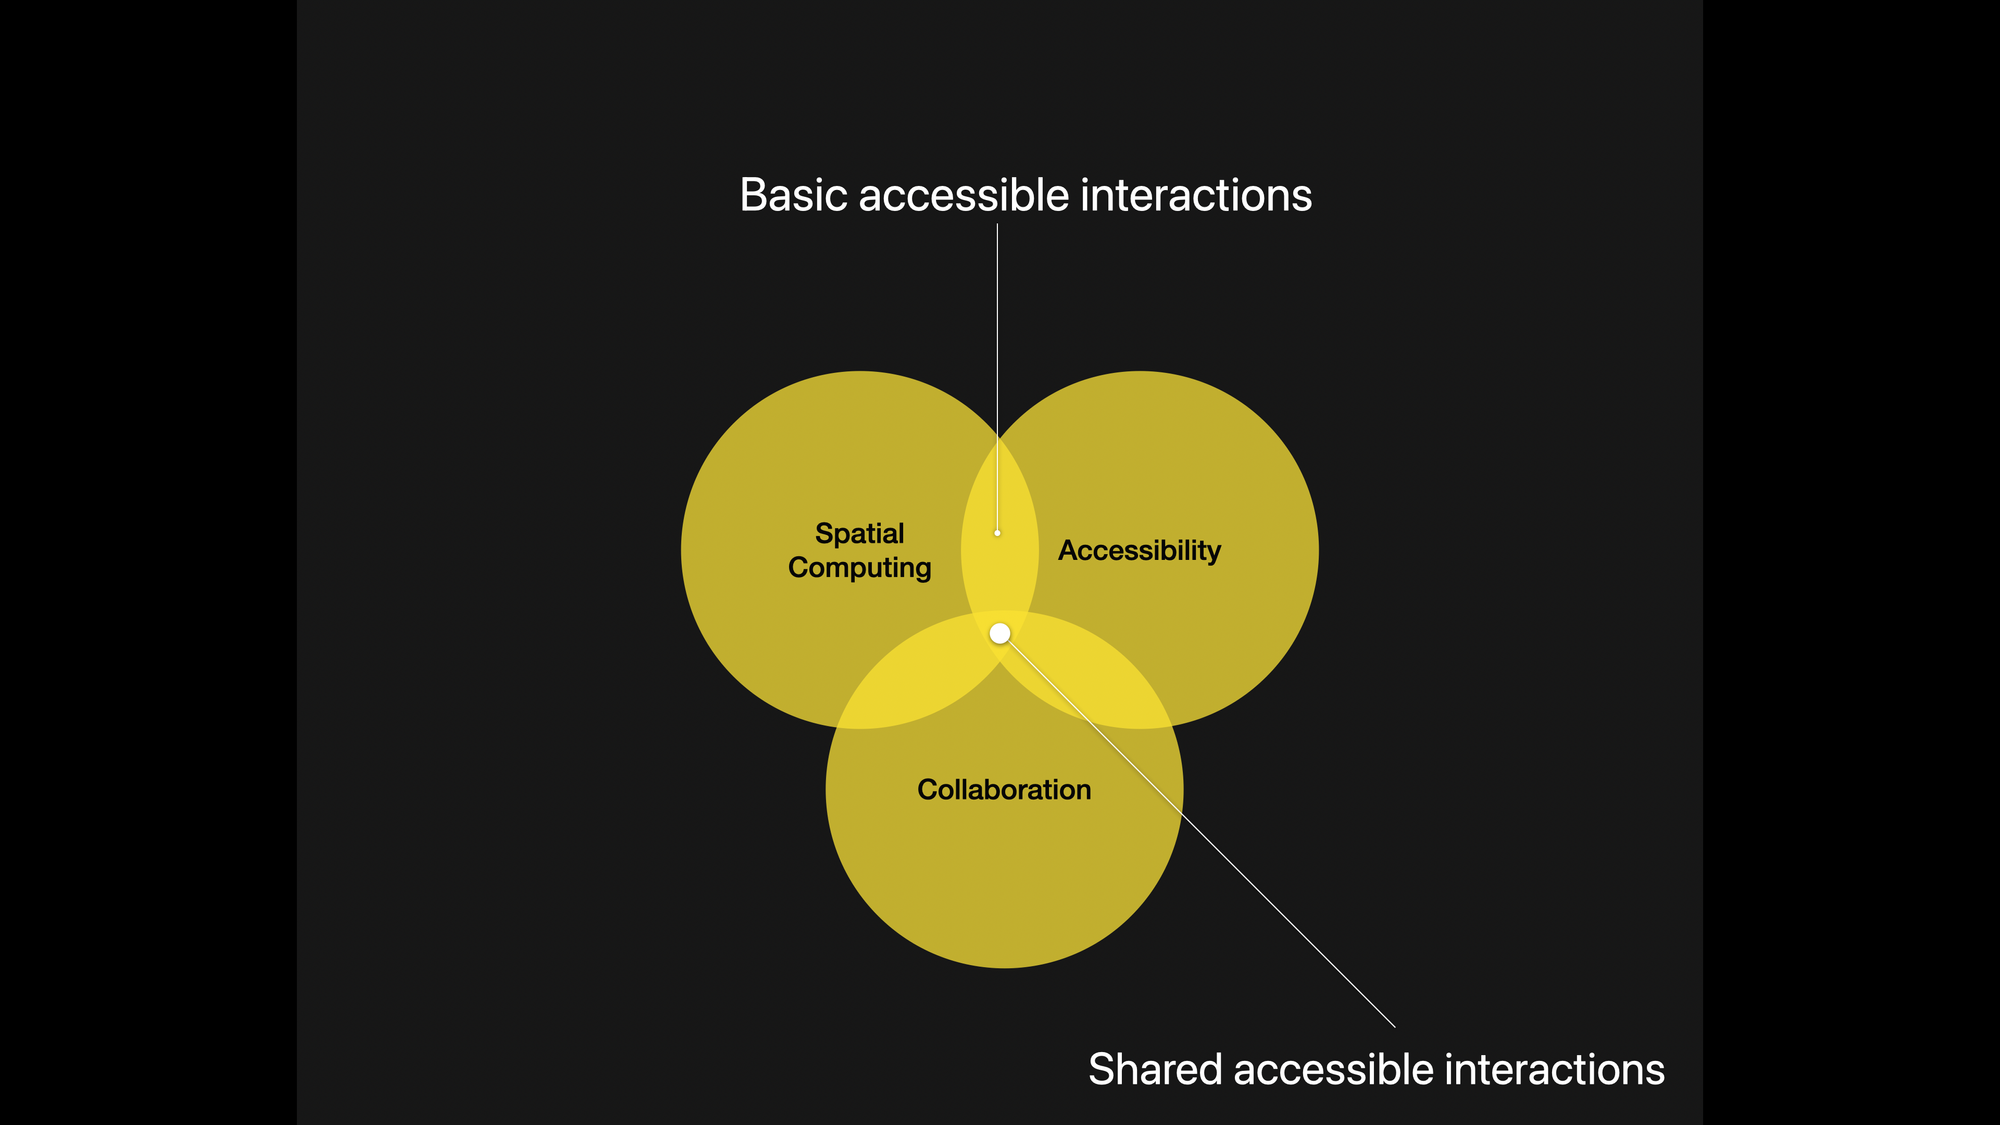 Venn diagram of basic interactions at the intersection of spatial computing, accessibility, and collaboration gives shared accessible interactions